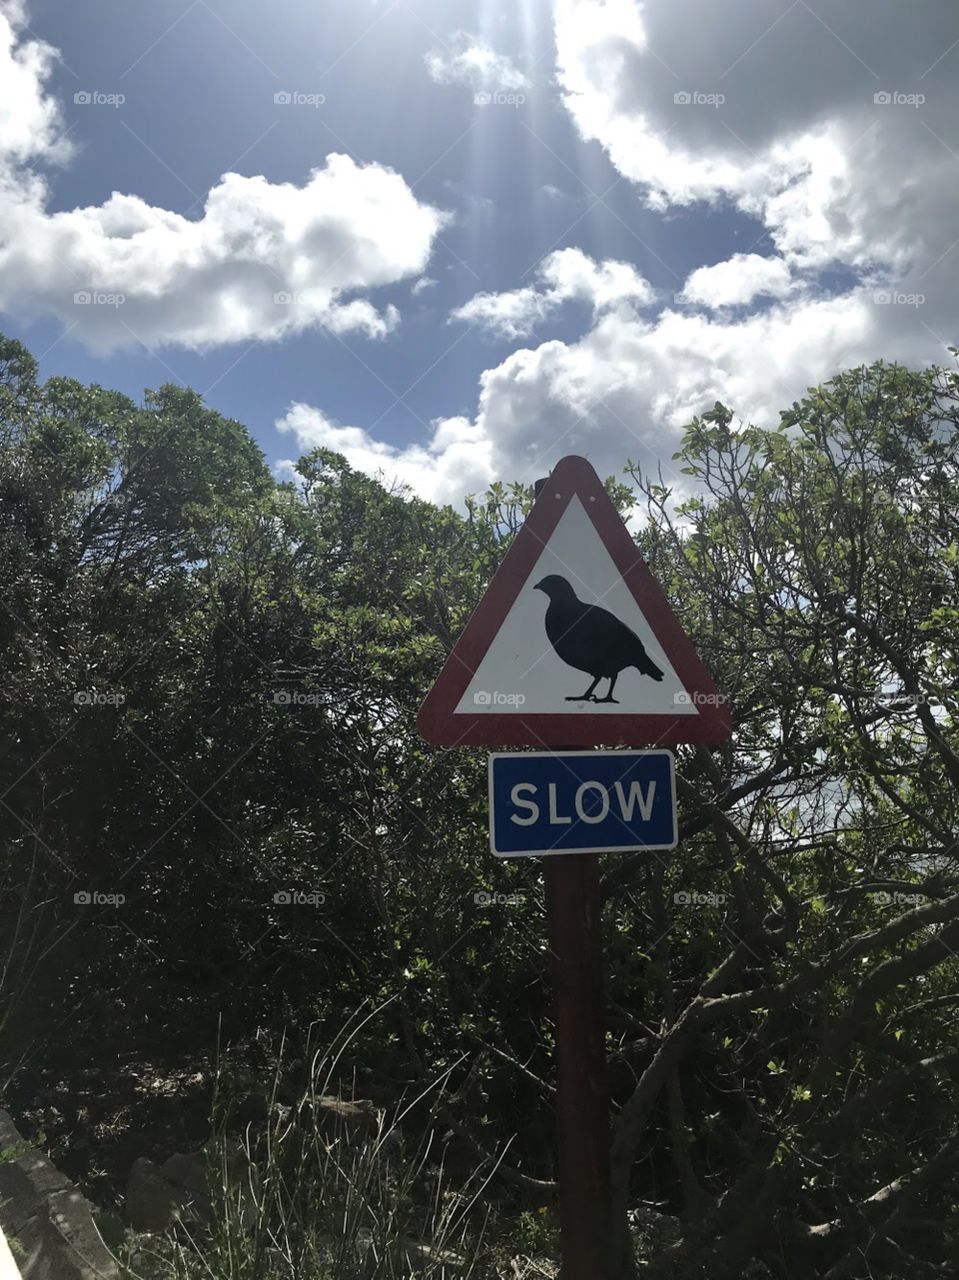 Slow bird sign with trees and blue sky clouds 